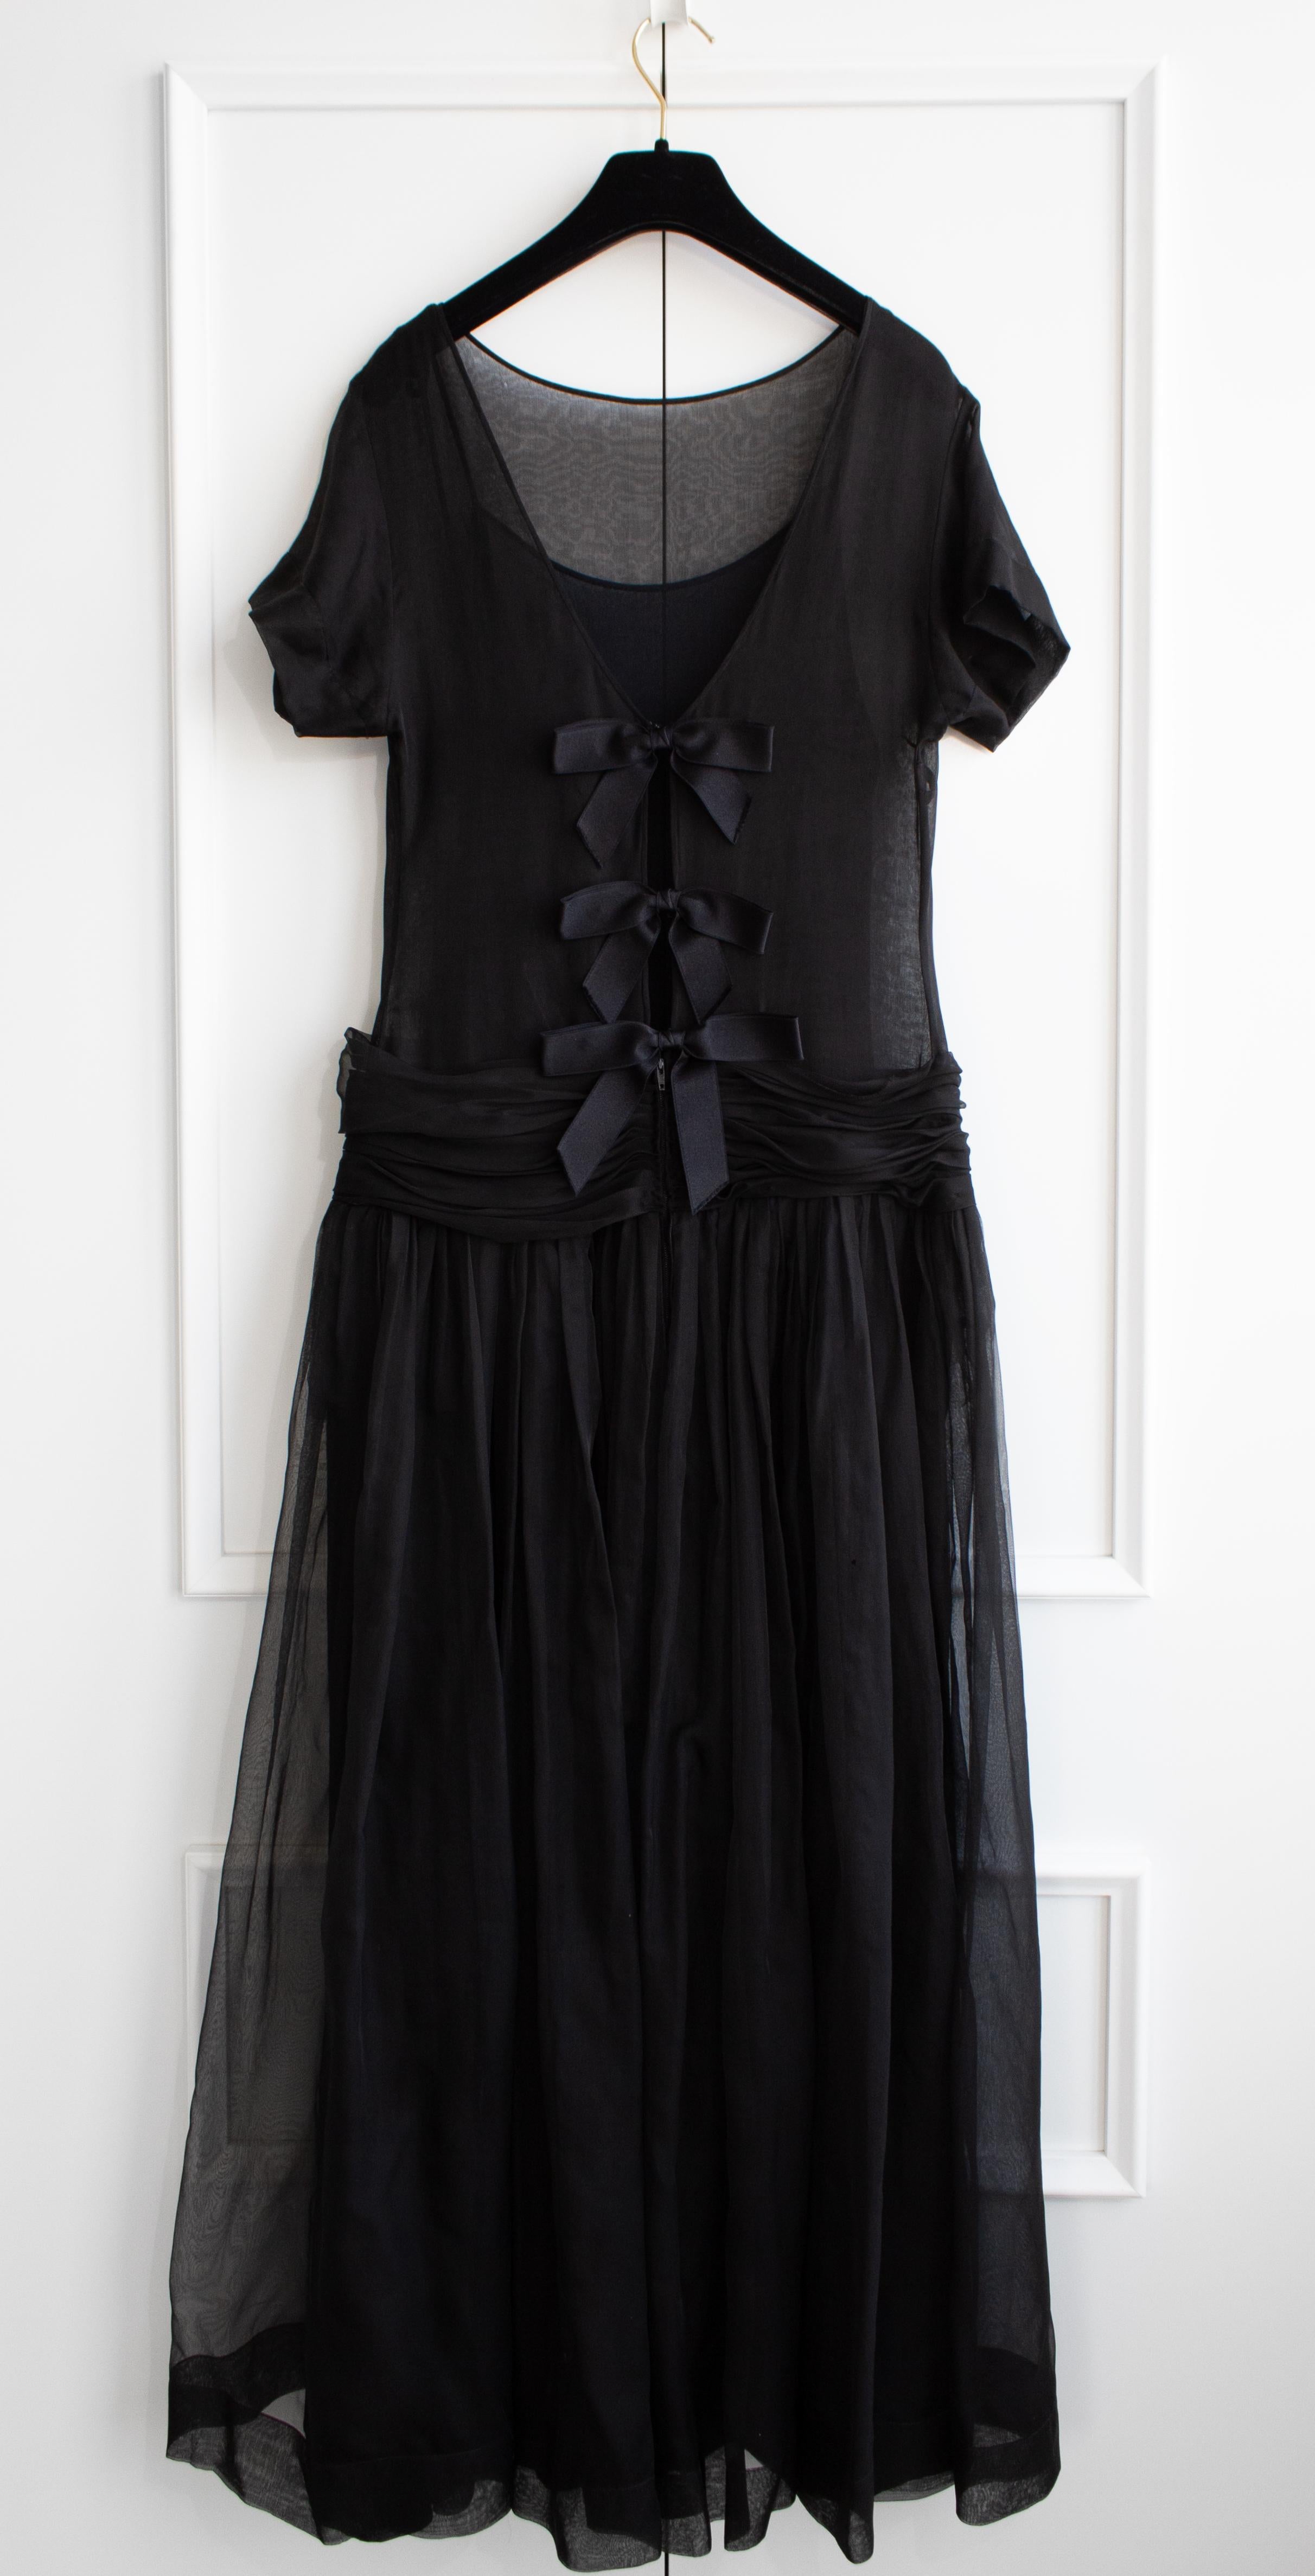 Chanel Vintage S/S 1989 Black Bow Silk Organza Long Gown Evening Dress 1